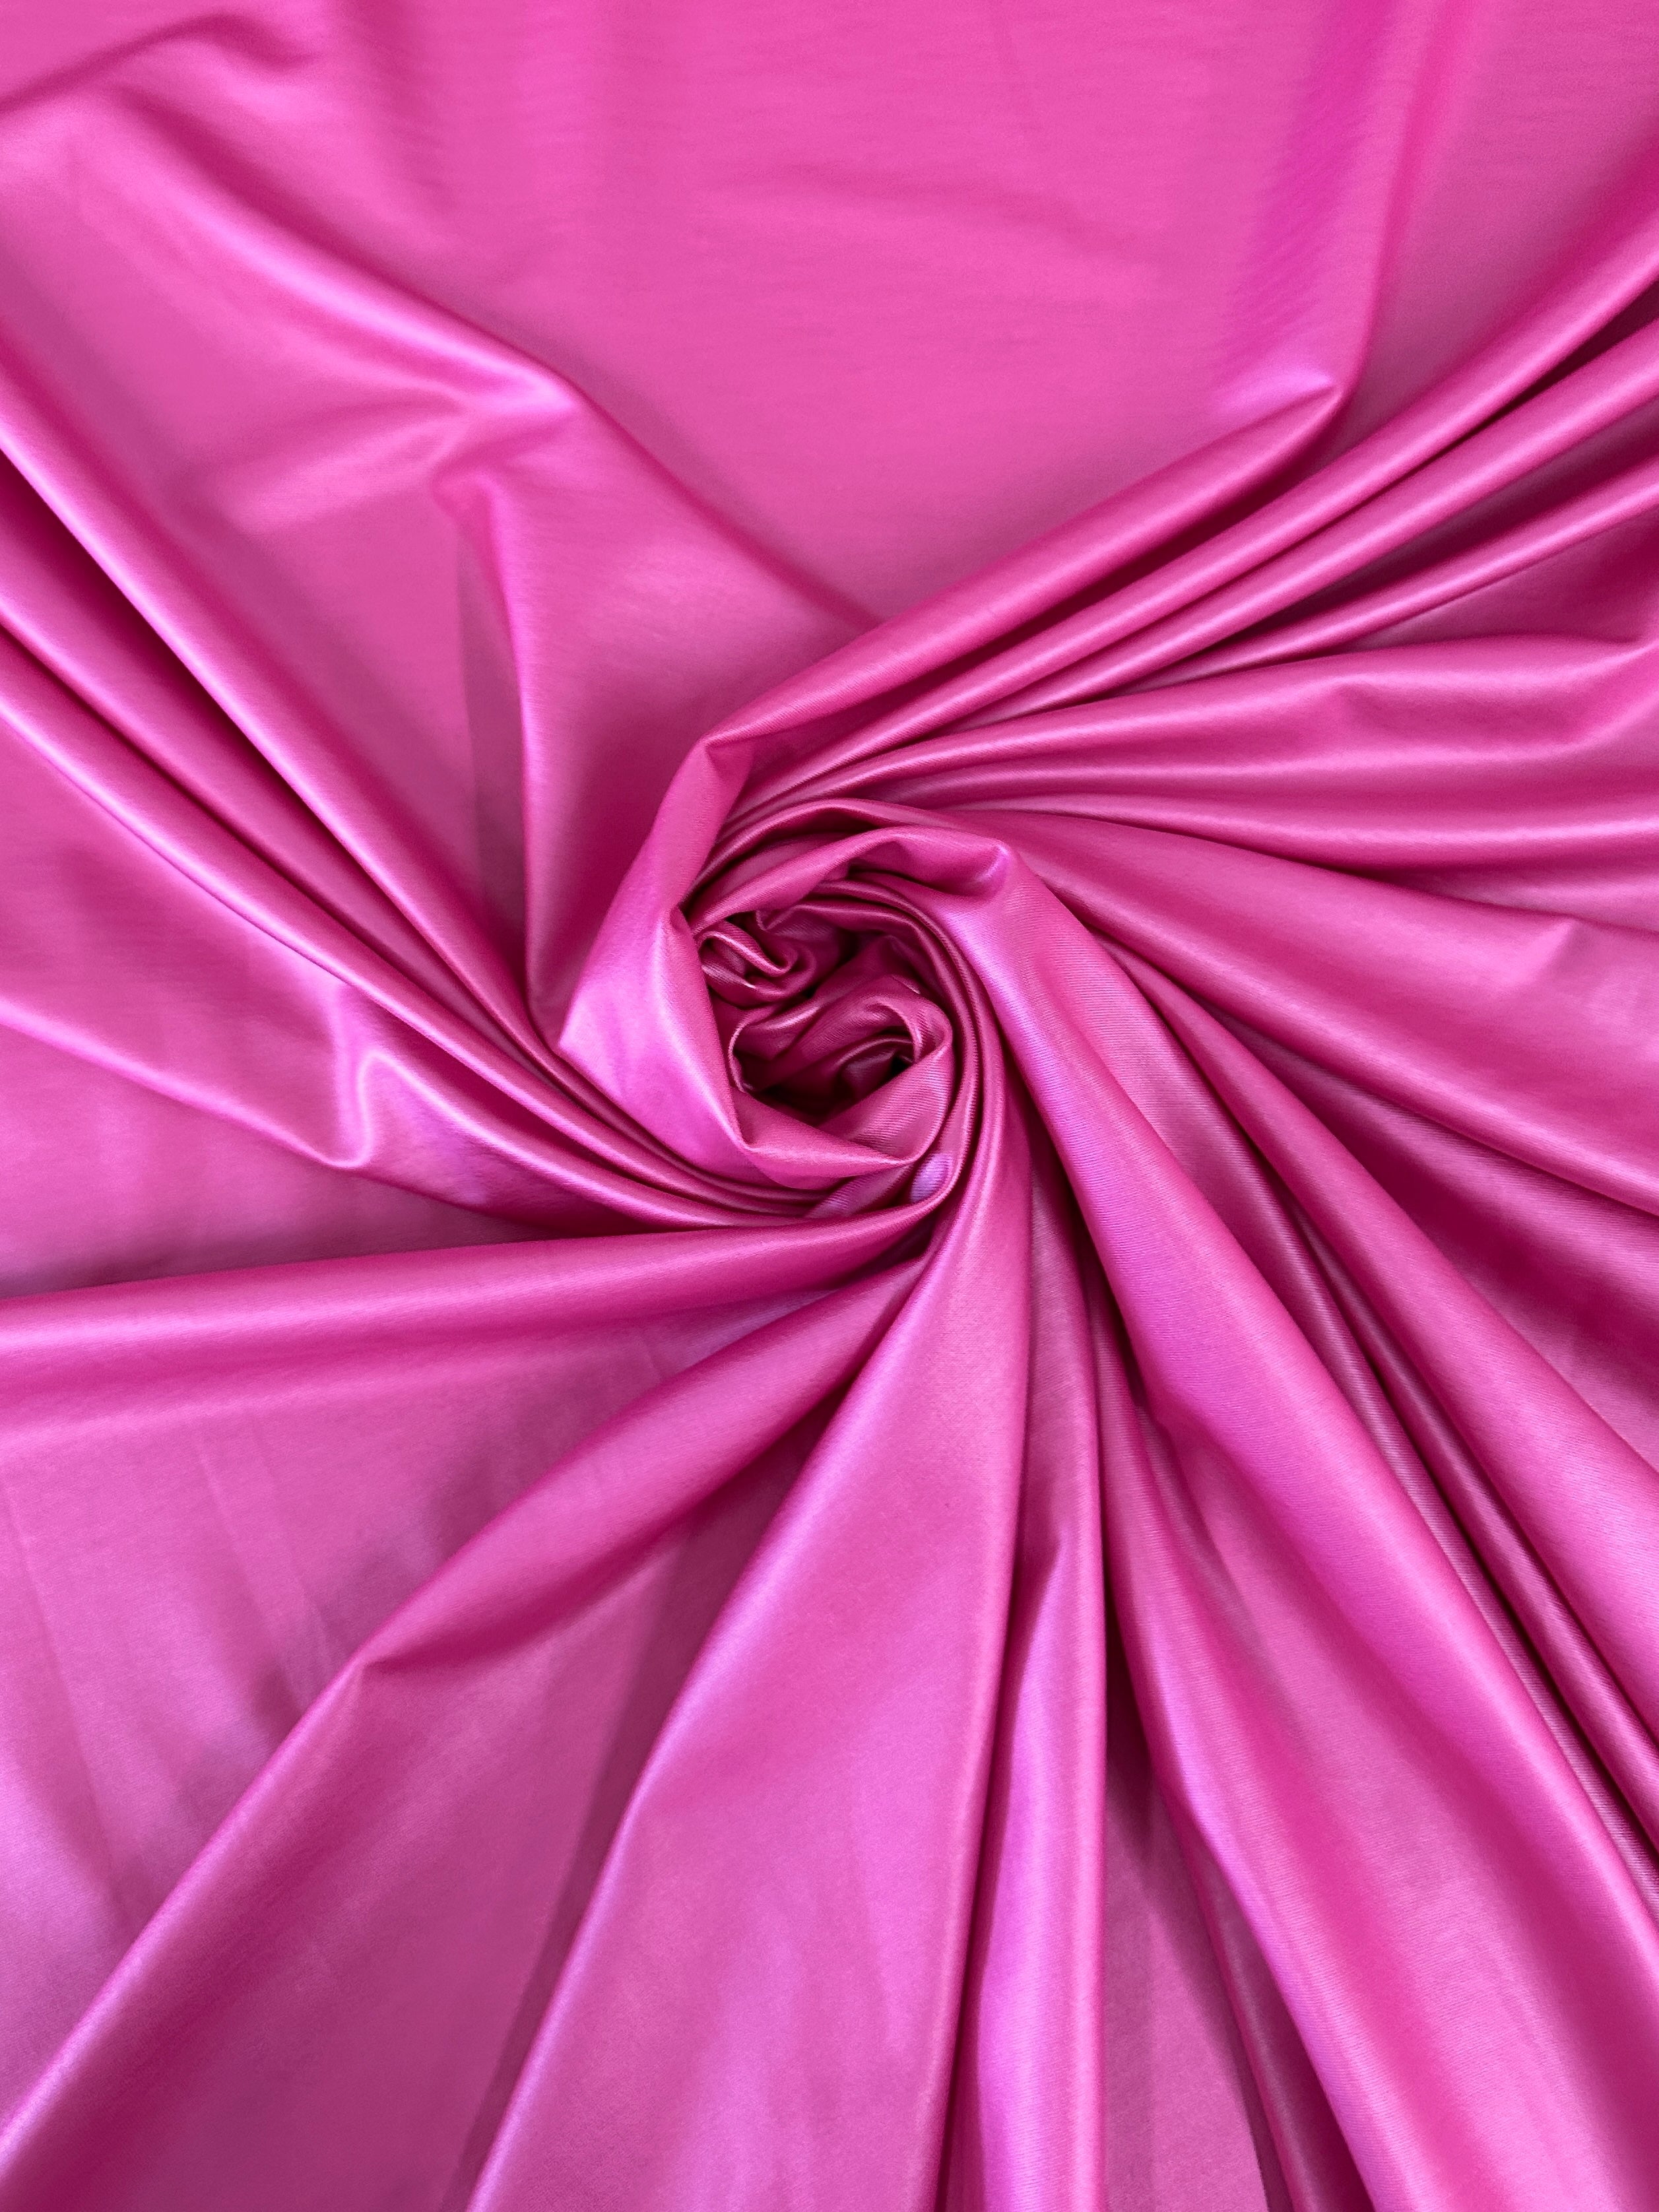 hot pink all way Stretch Faux Leather, pink all way stretch leather, shiny faux leather, light pink all way stretch faux leather for woman, faux leather for costumes, faux leather for home decor, 2 way stretch faux leather, leather for blazers, cheap leather, discounted leather, leather on sale